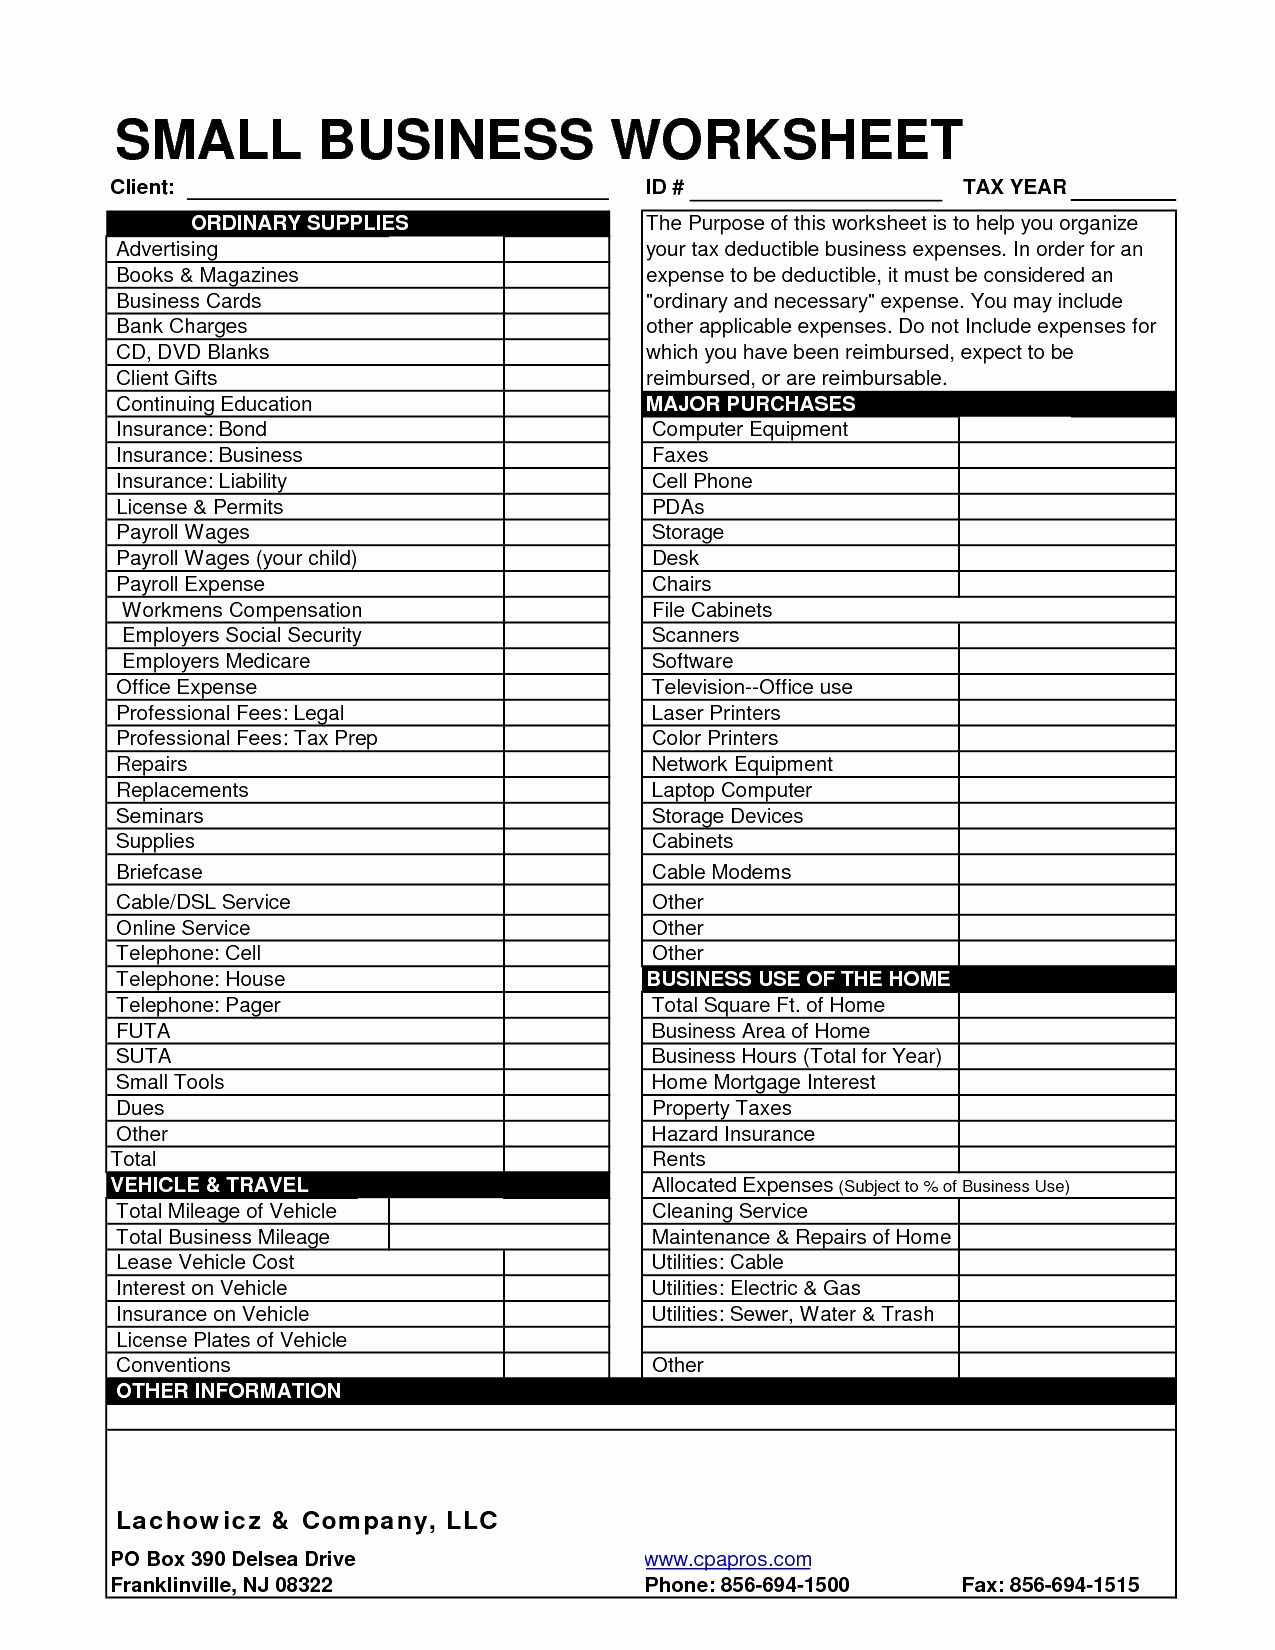 Small Business Accounting Spreadsheet Fresh Simple Business and Basic Accounting Spreadsheet For Small Business